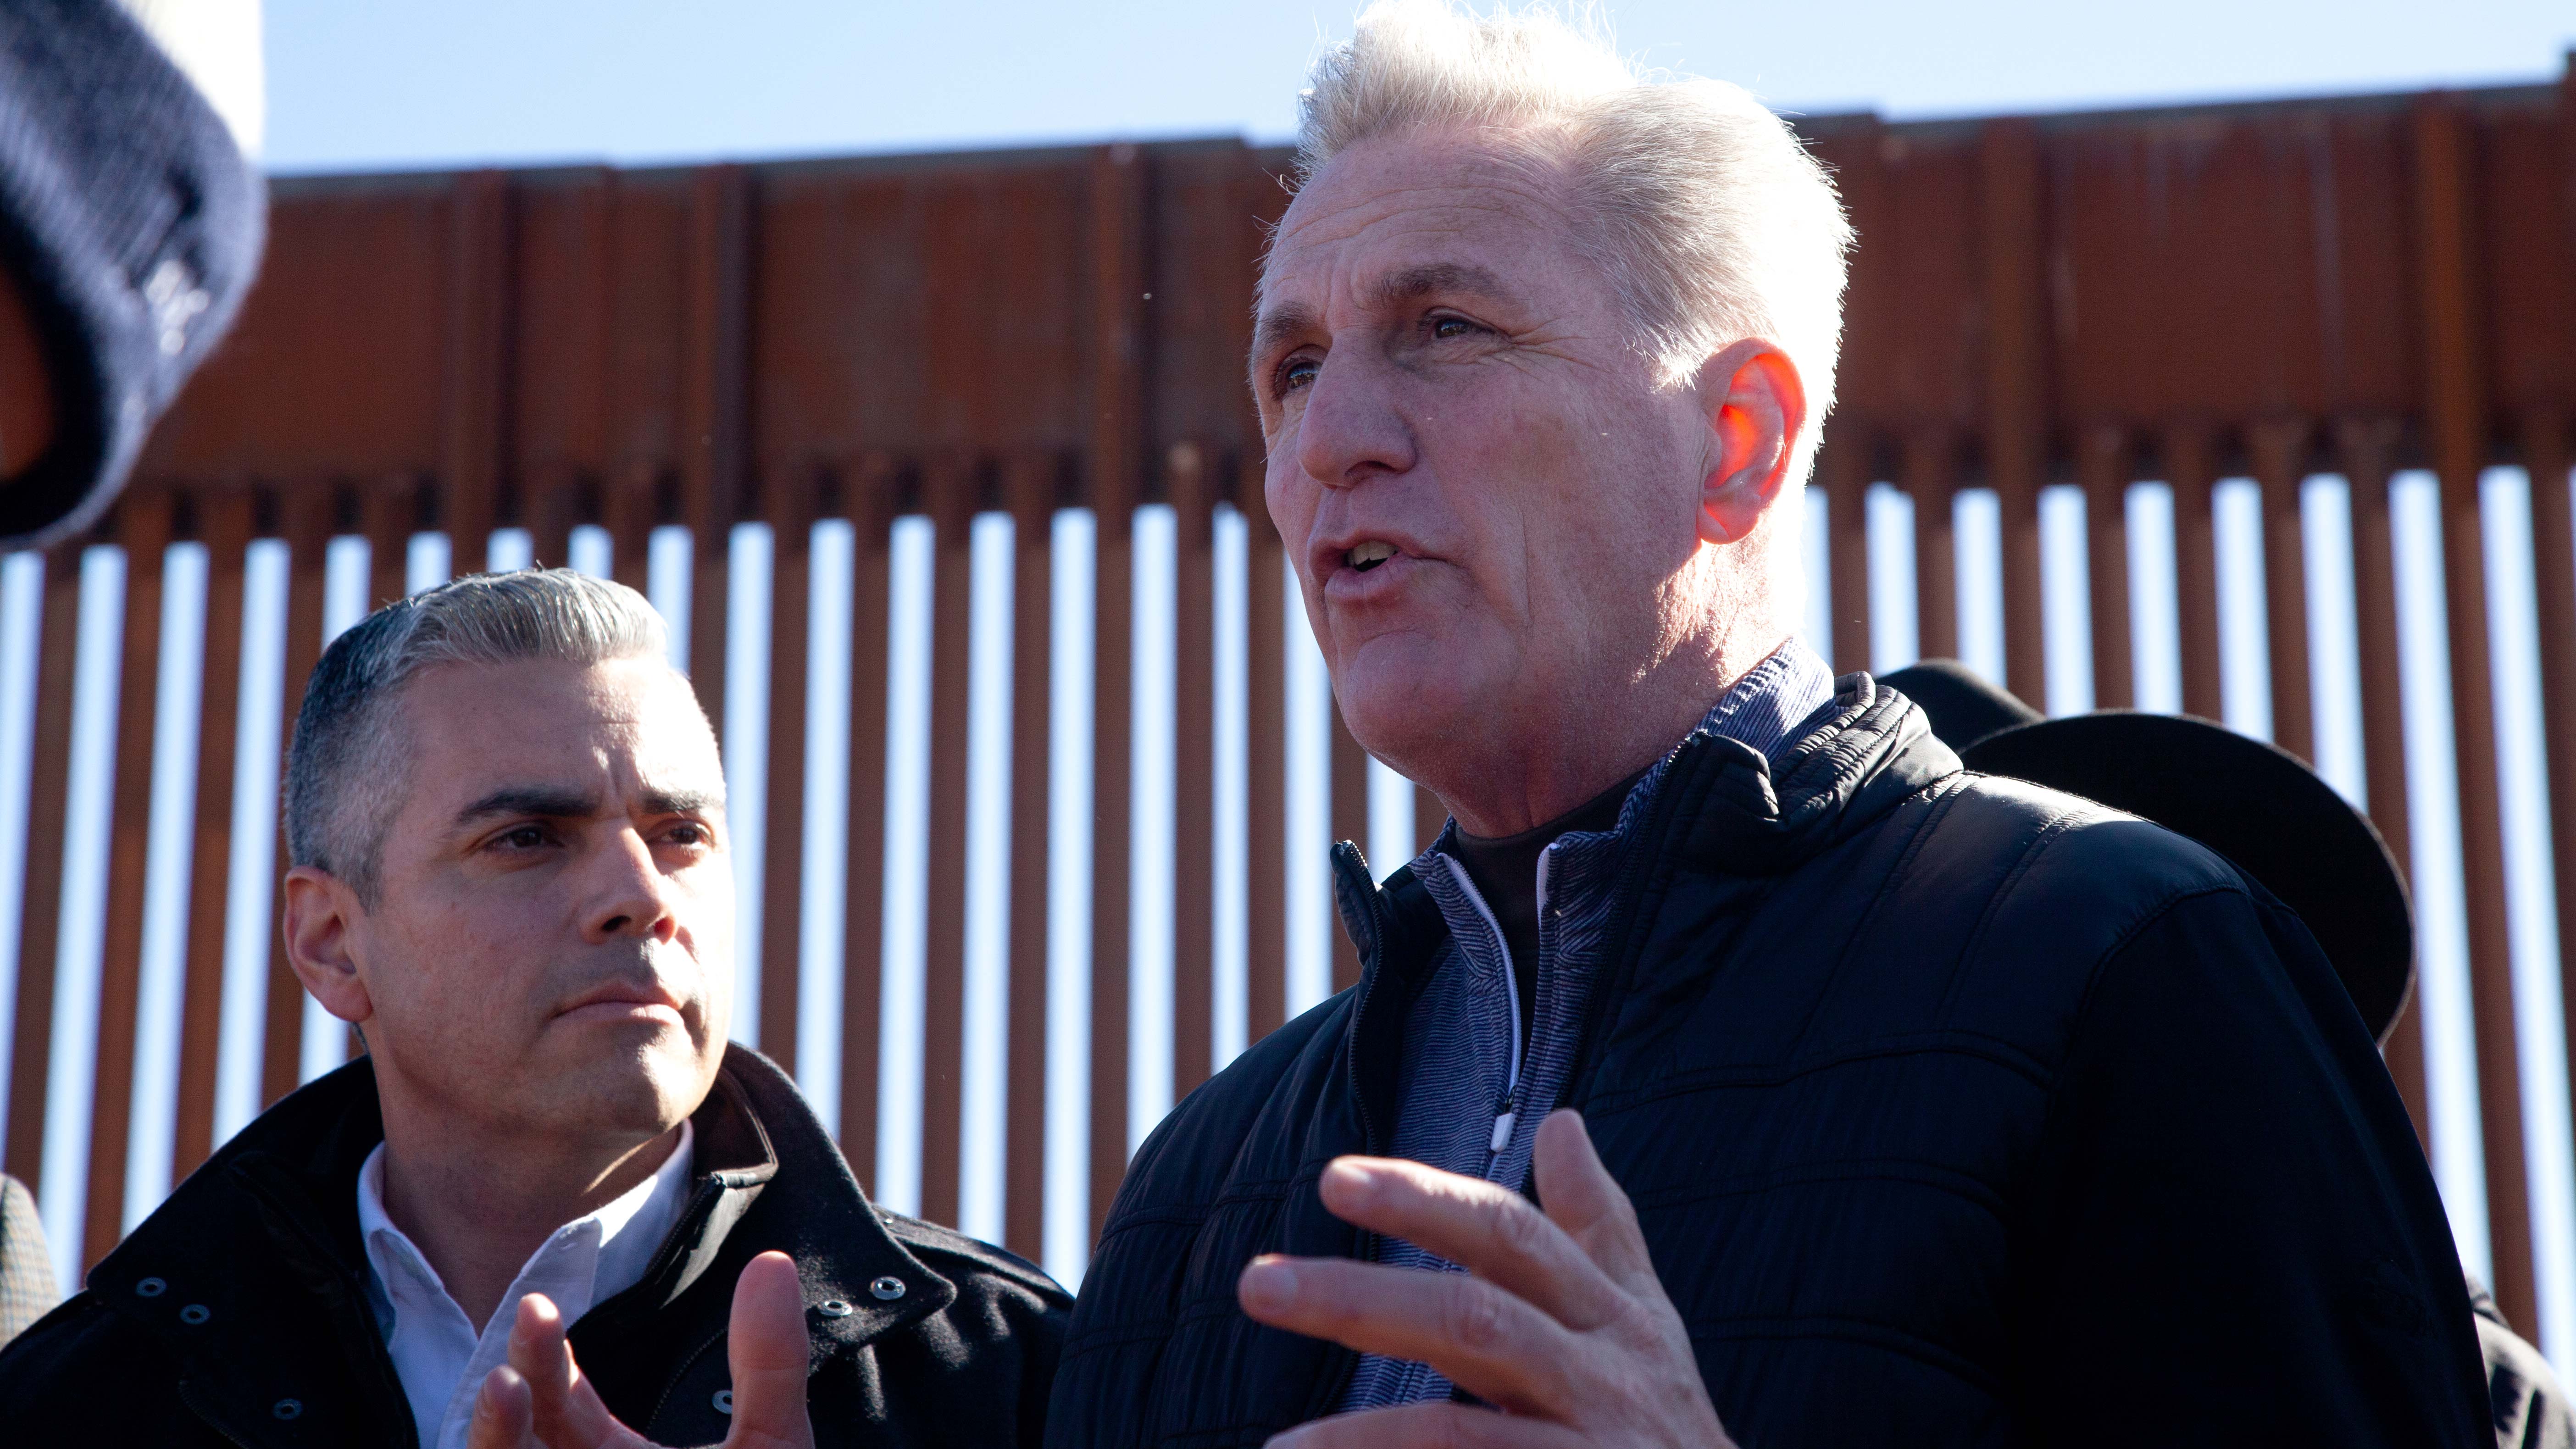 Republican U.S. House Speaker Kevin McCarthy speaks about "gaps in the border" during a press gaggle along the Southern Arizona border on Thursday, Feb. 16, 2023 in Hereford, AZ. During his trip, McCarthy emphasized the need for more hearings along the border and asked for Secretary of Homeland Security Alejandro Mayorkas to visit and listen to locals. 